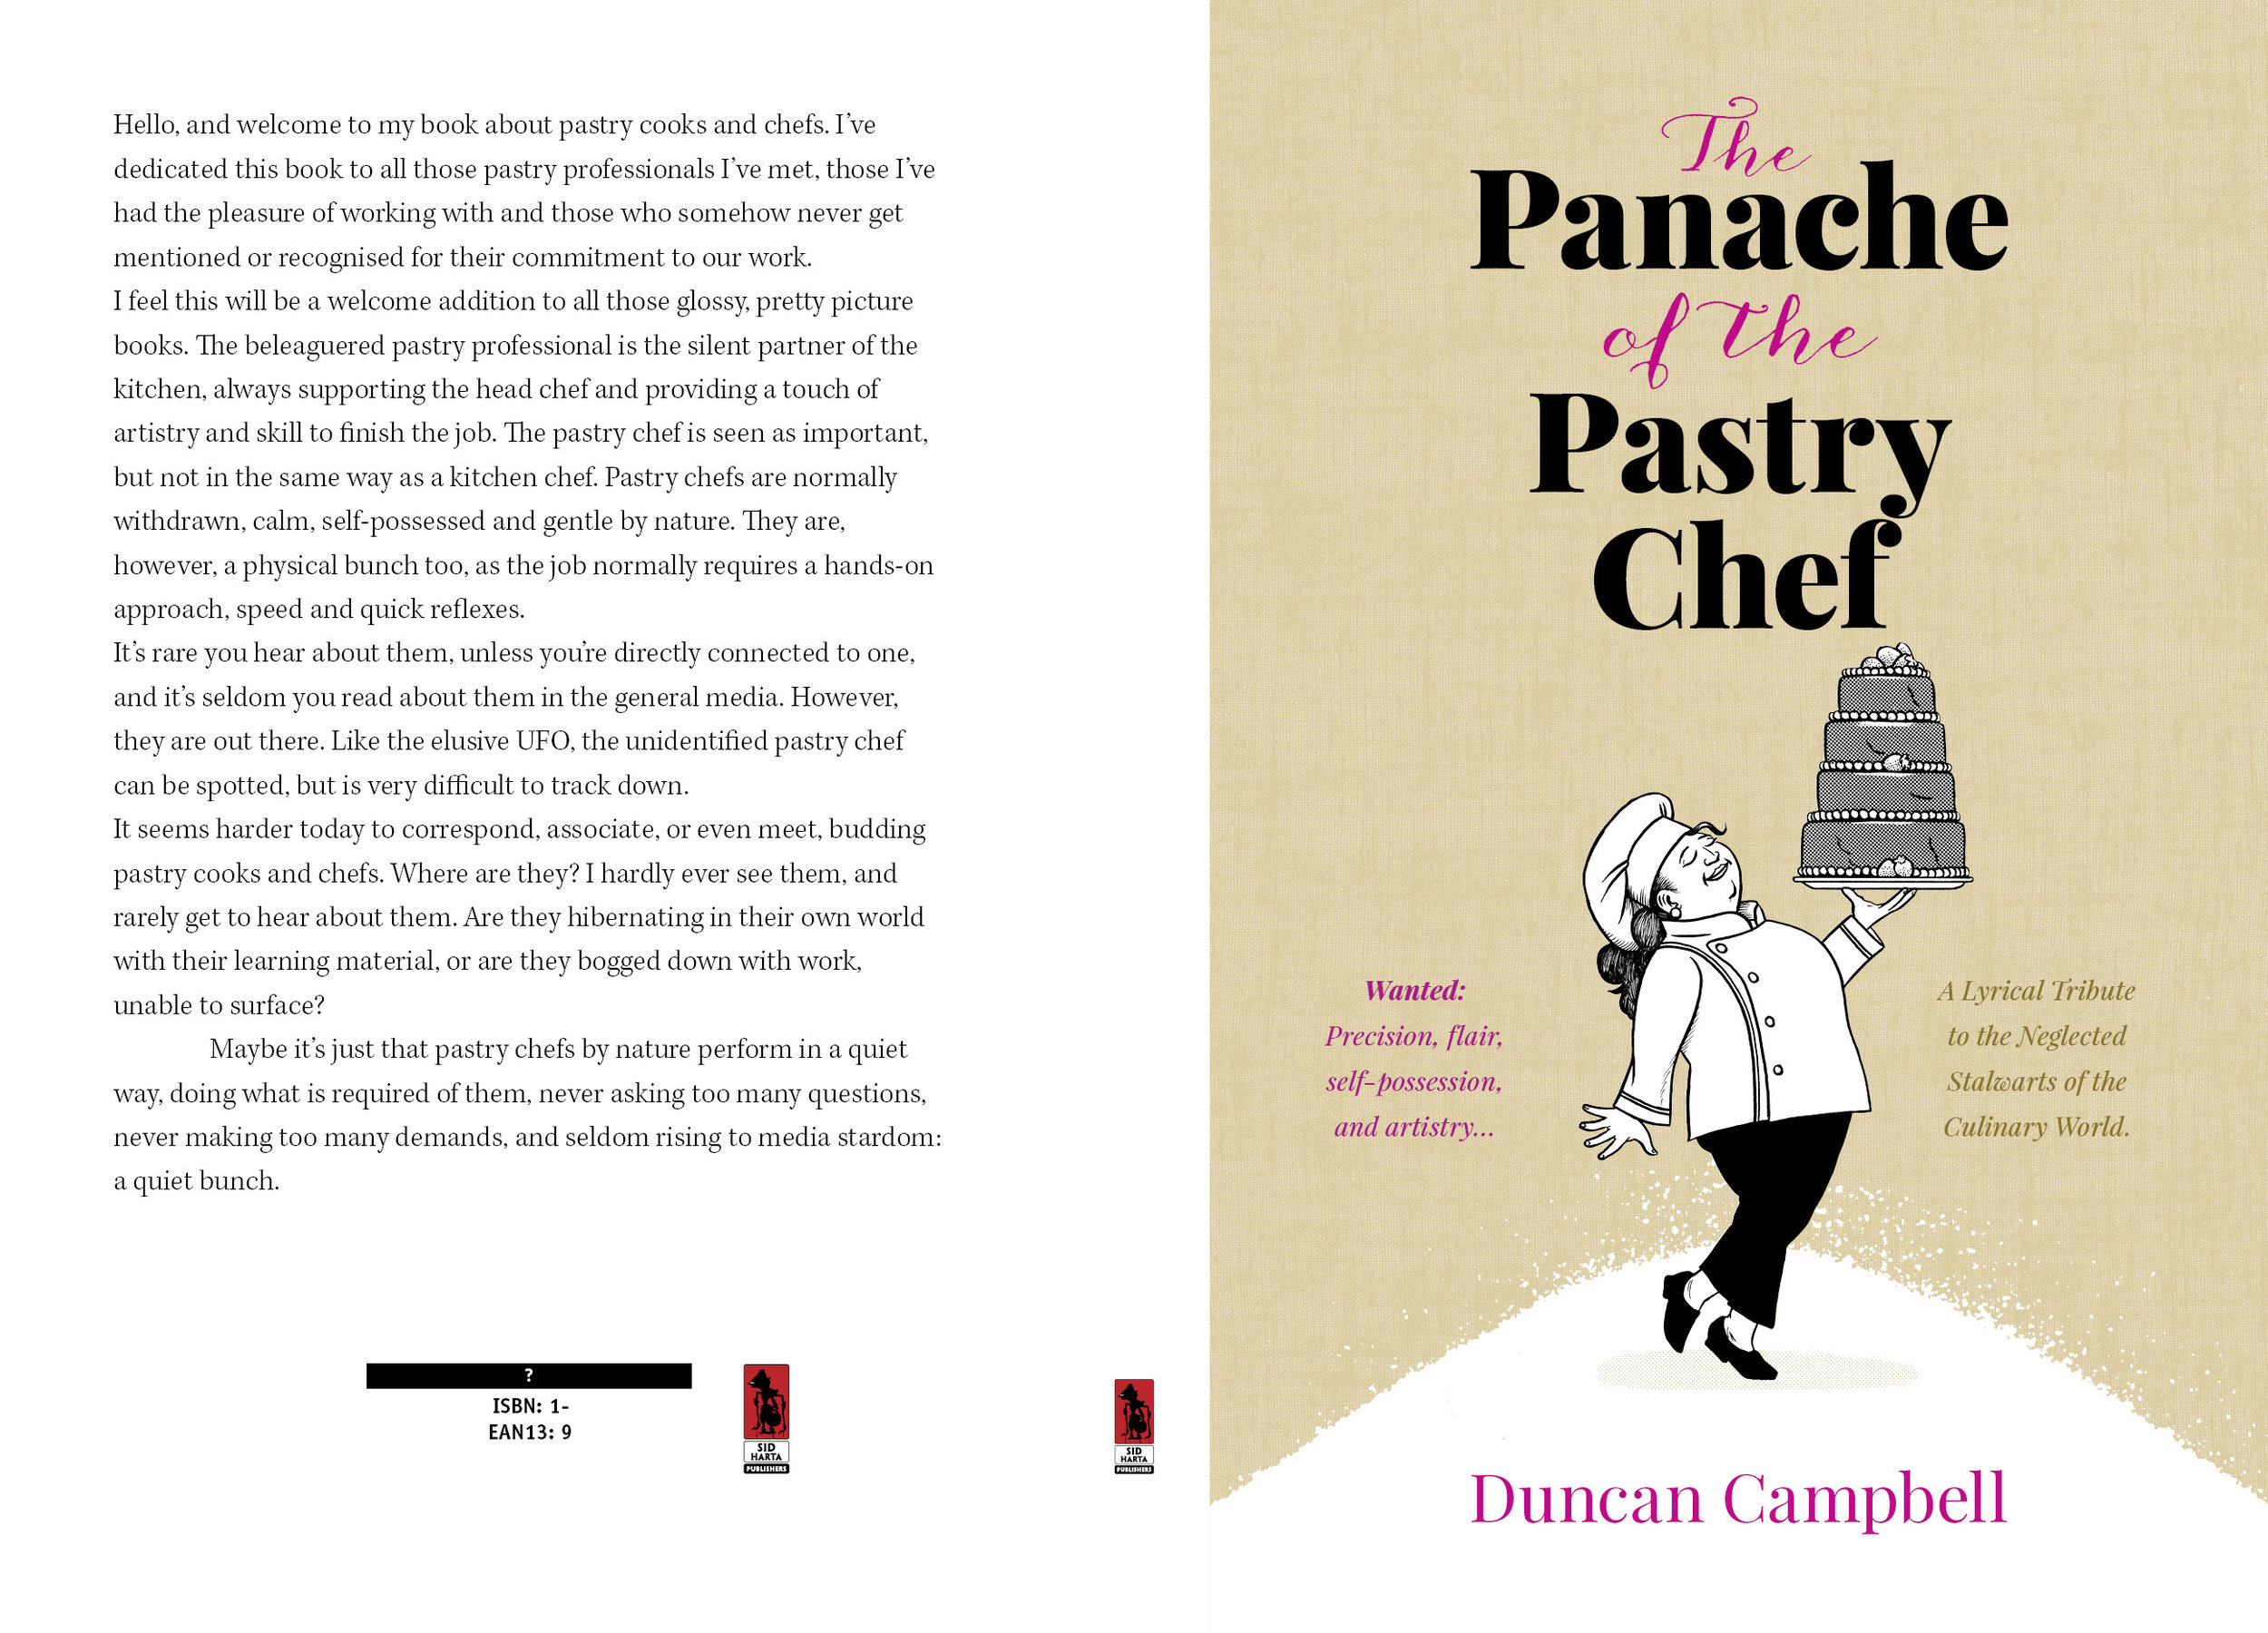 Panache of Pastry Chefs_cover pages.jpg